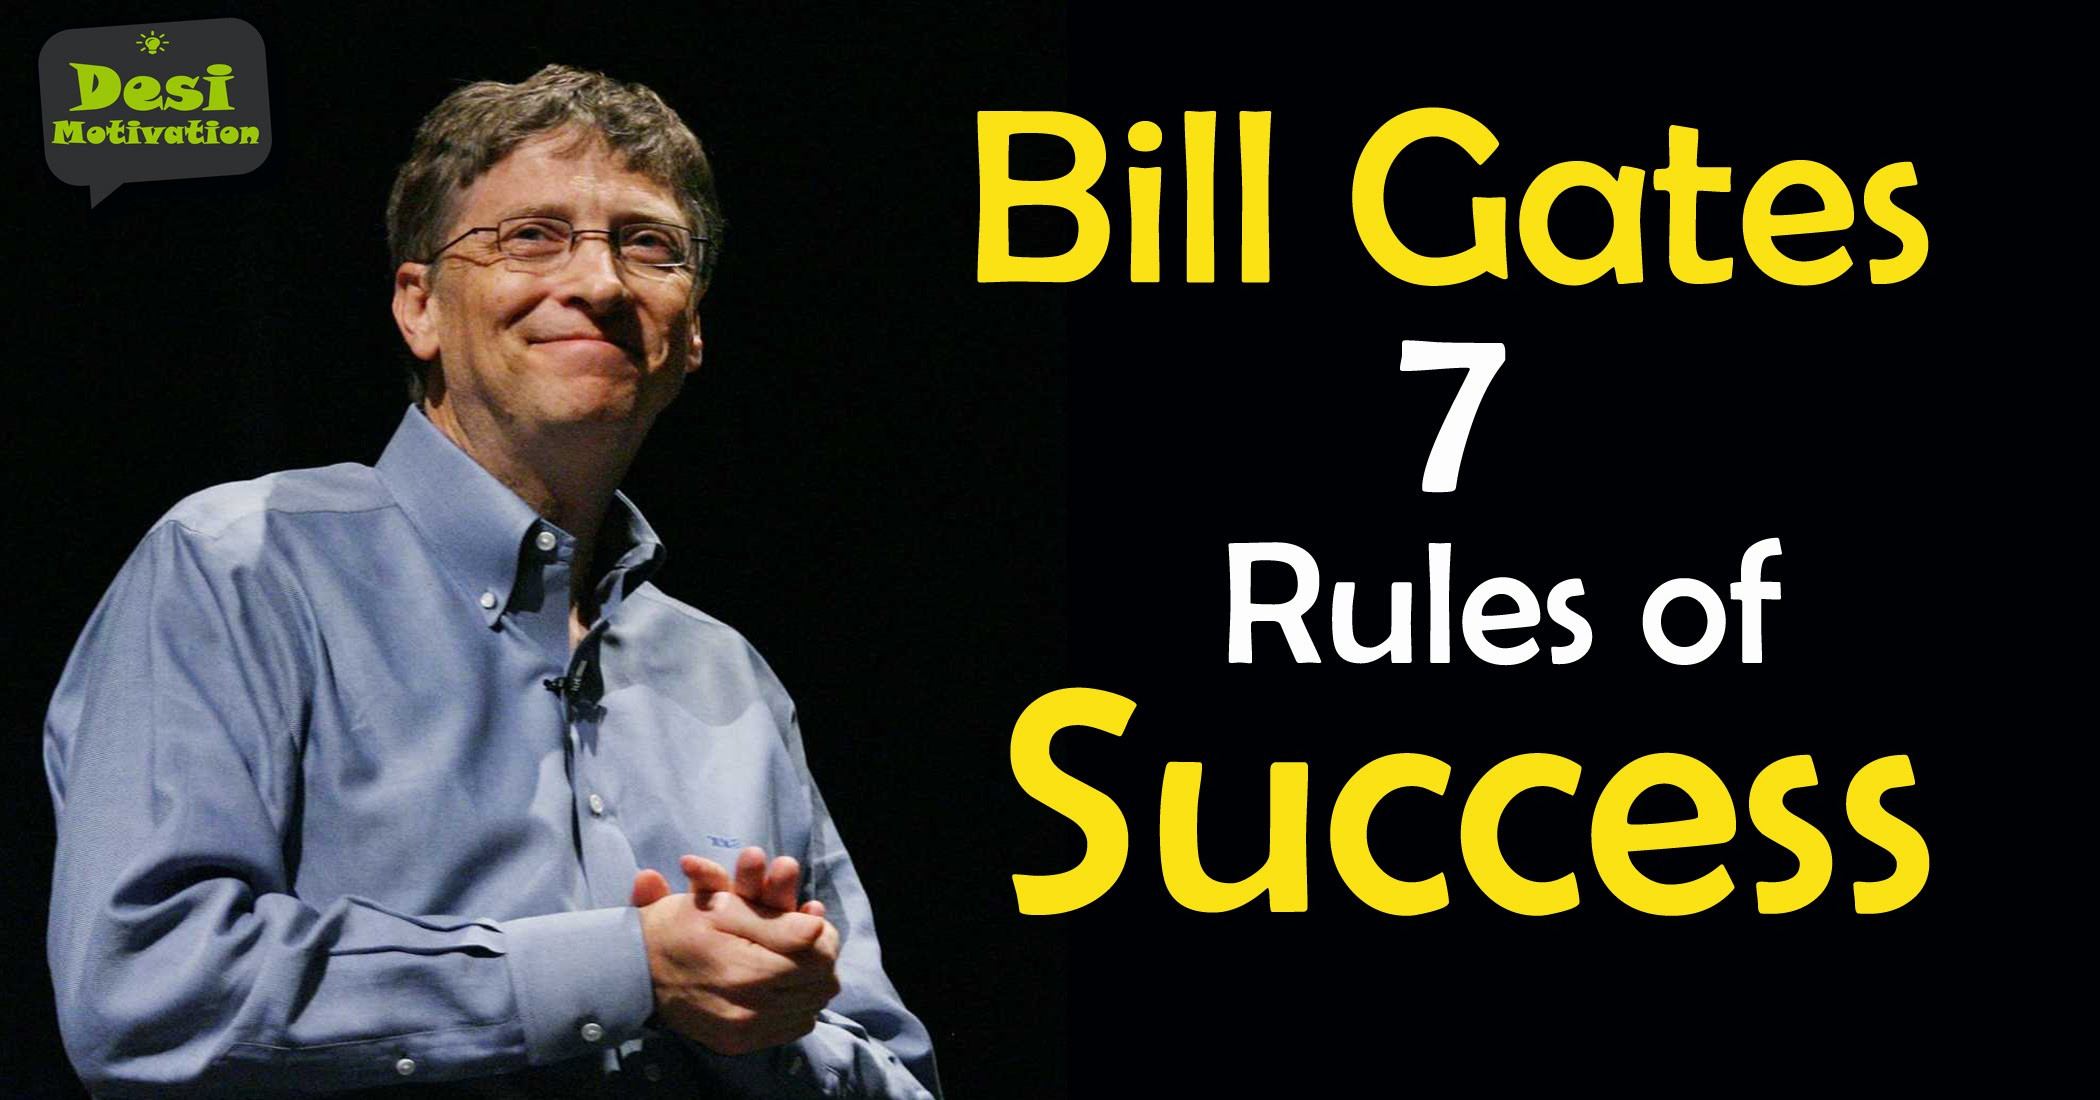 2100x1100 ... Wallpaper Cave Â· Bill Gates Motivational Images For Students Hindi Bill  Gates 7 Rules Of Success | Microsoft Founder ...